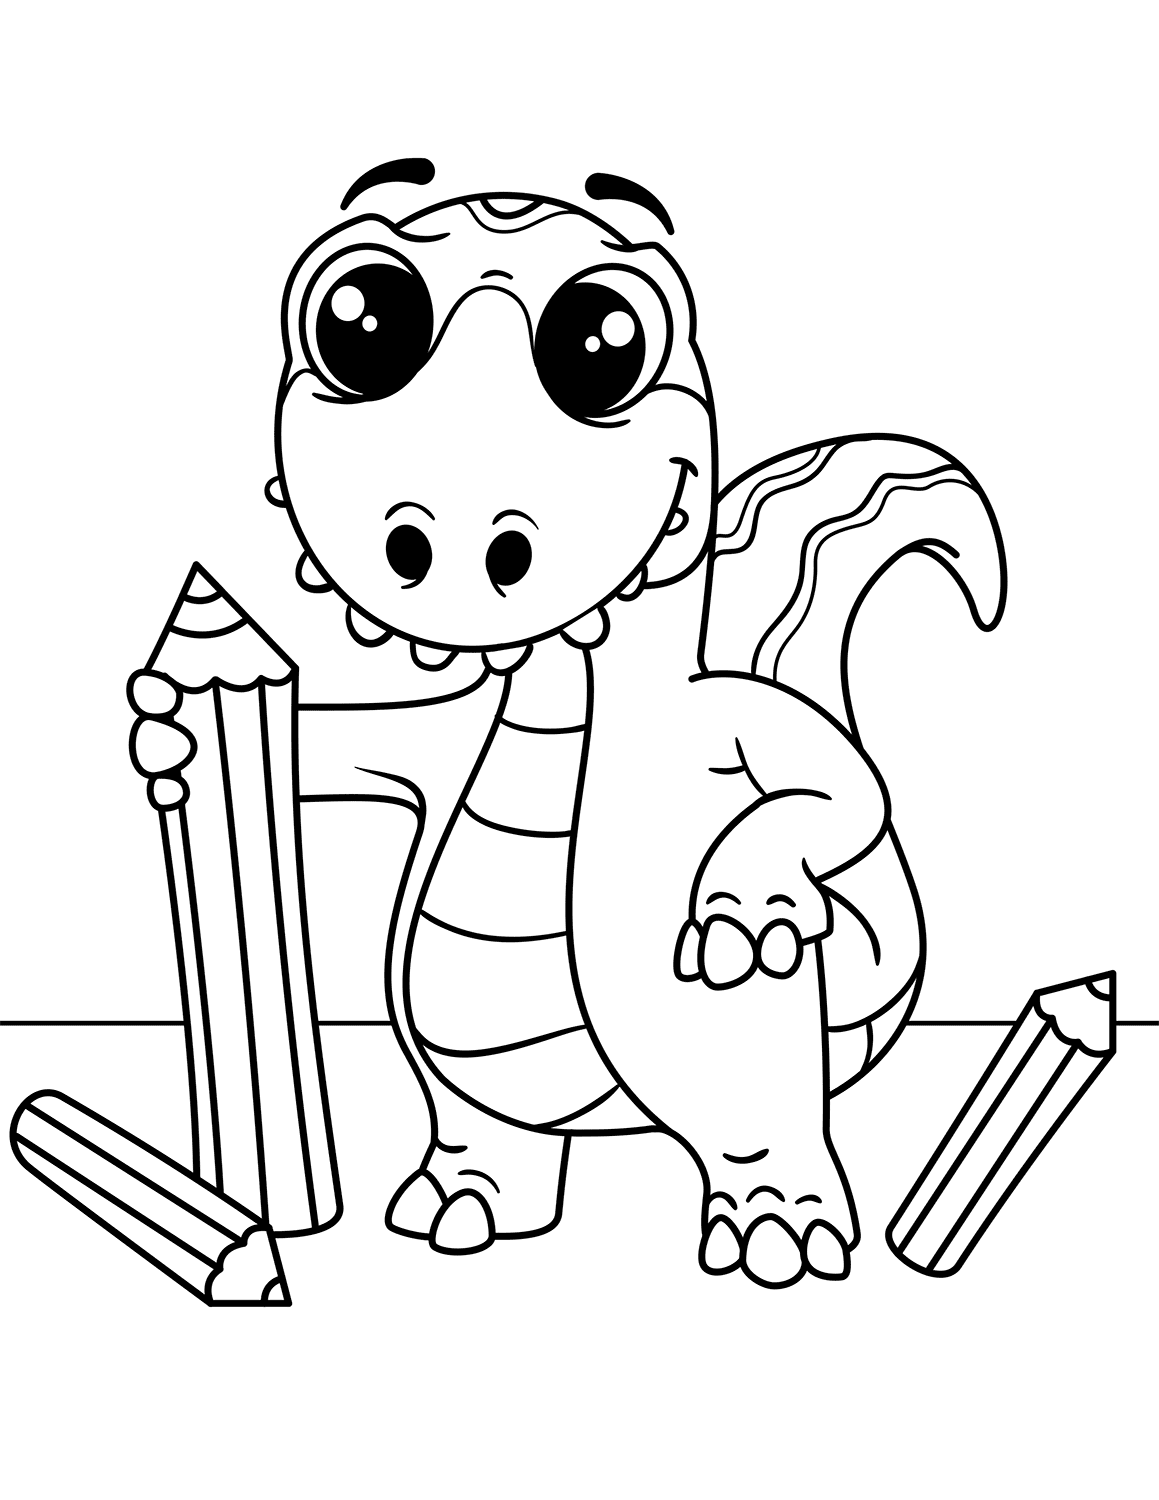 Baby Dinosaur With Pencils Coloring Page   Free Printable Coloring ...